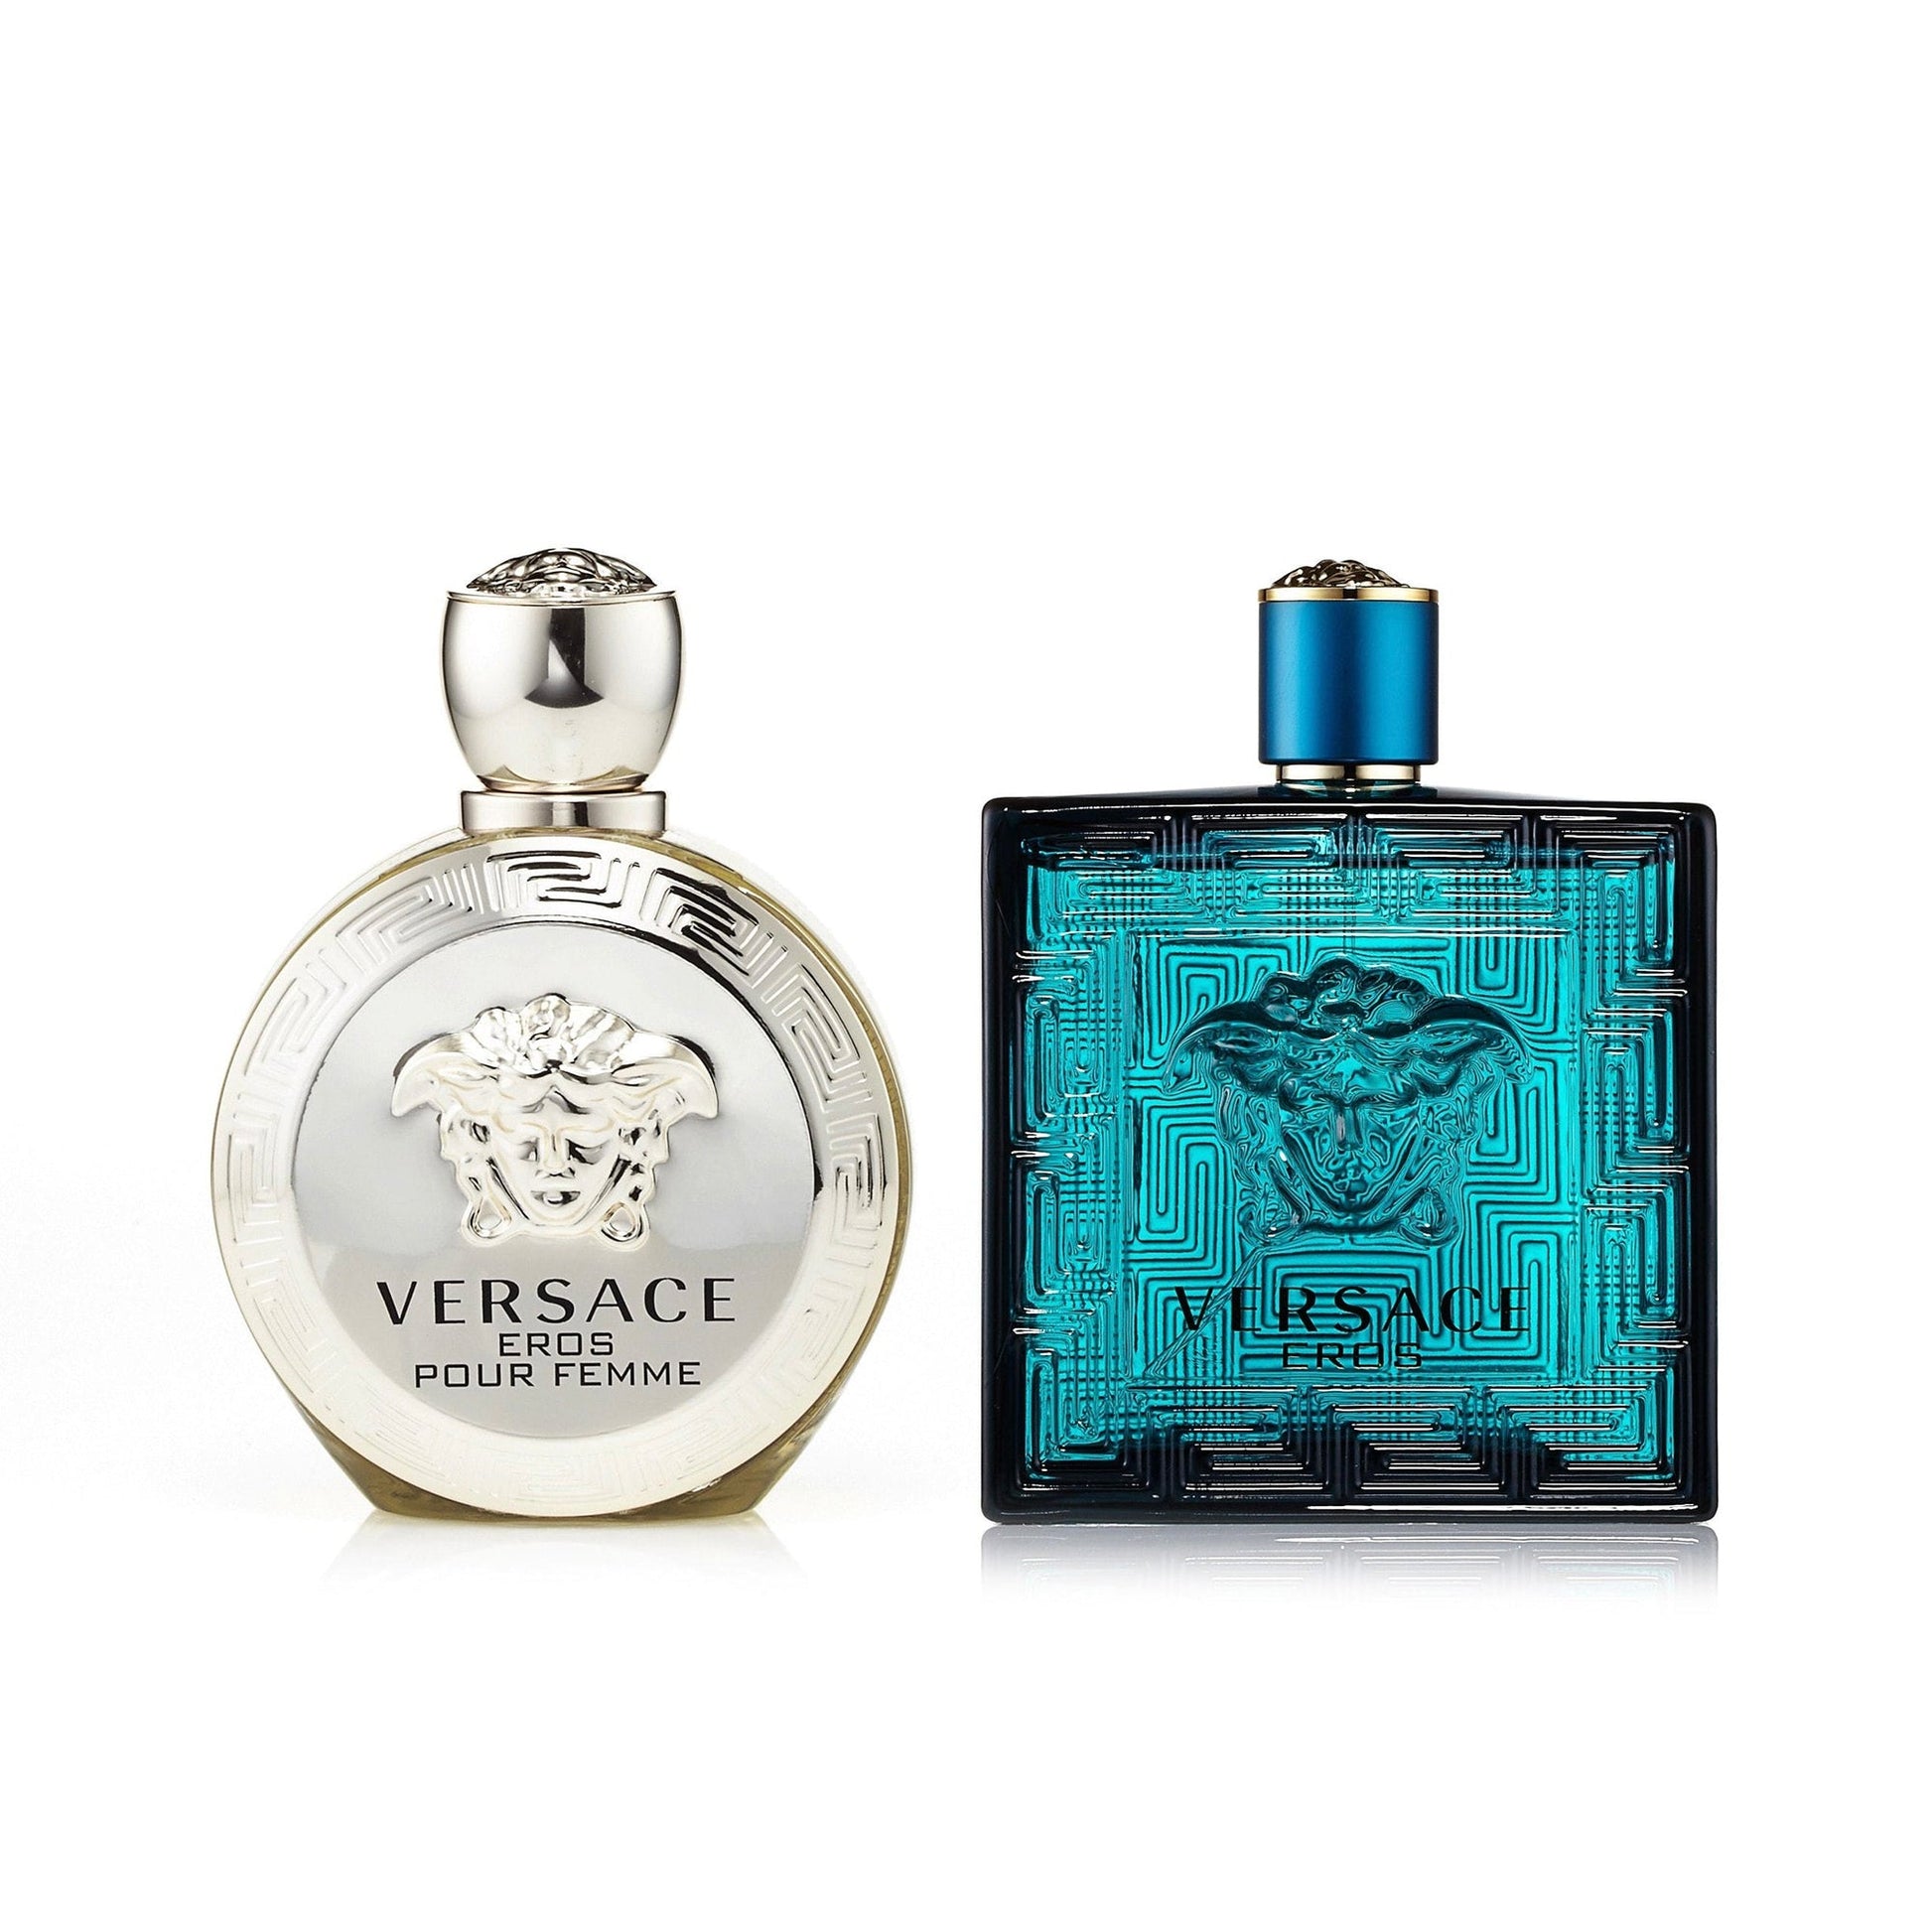 Bundle Deal His & Hers: Eros by Versace for Men and Women, Product image 1